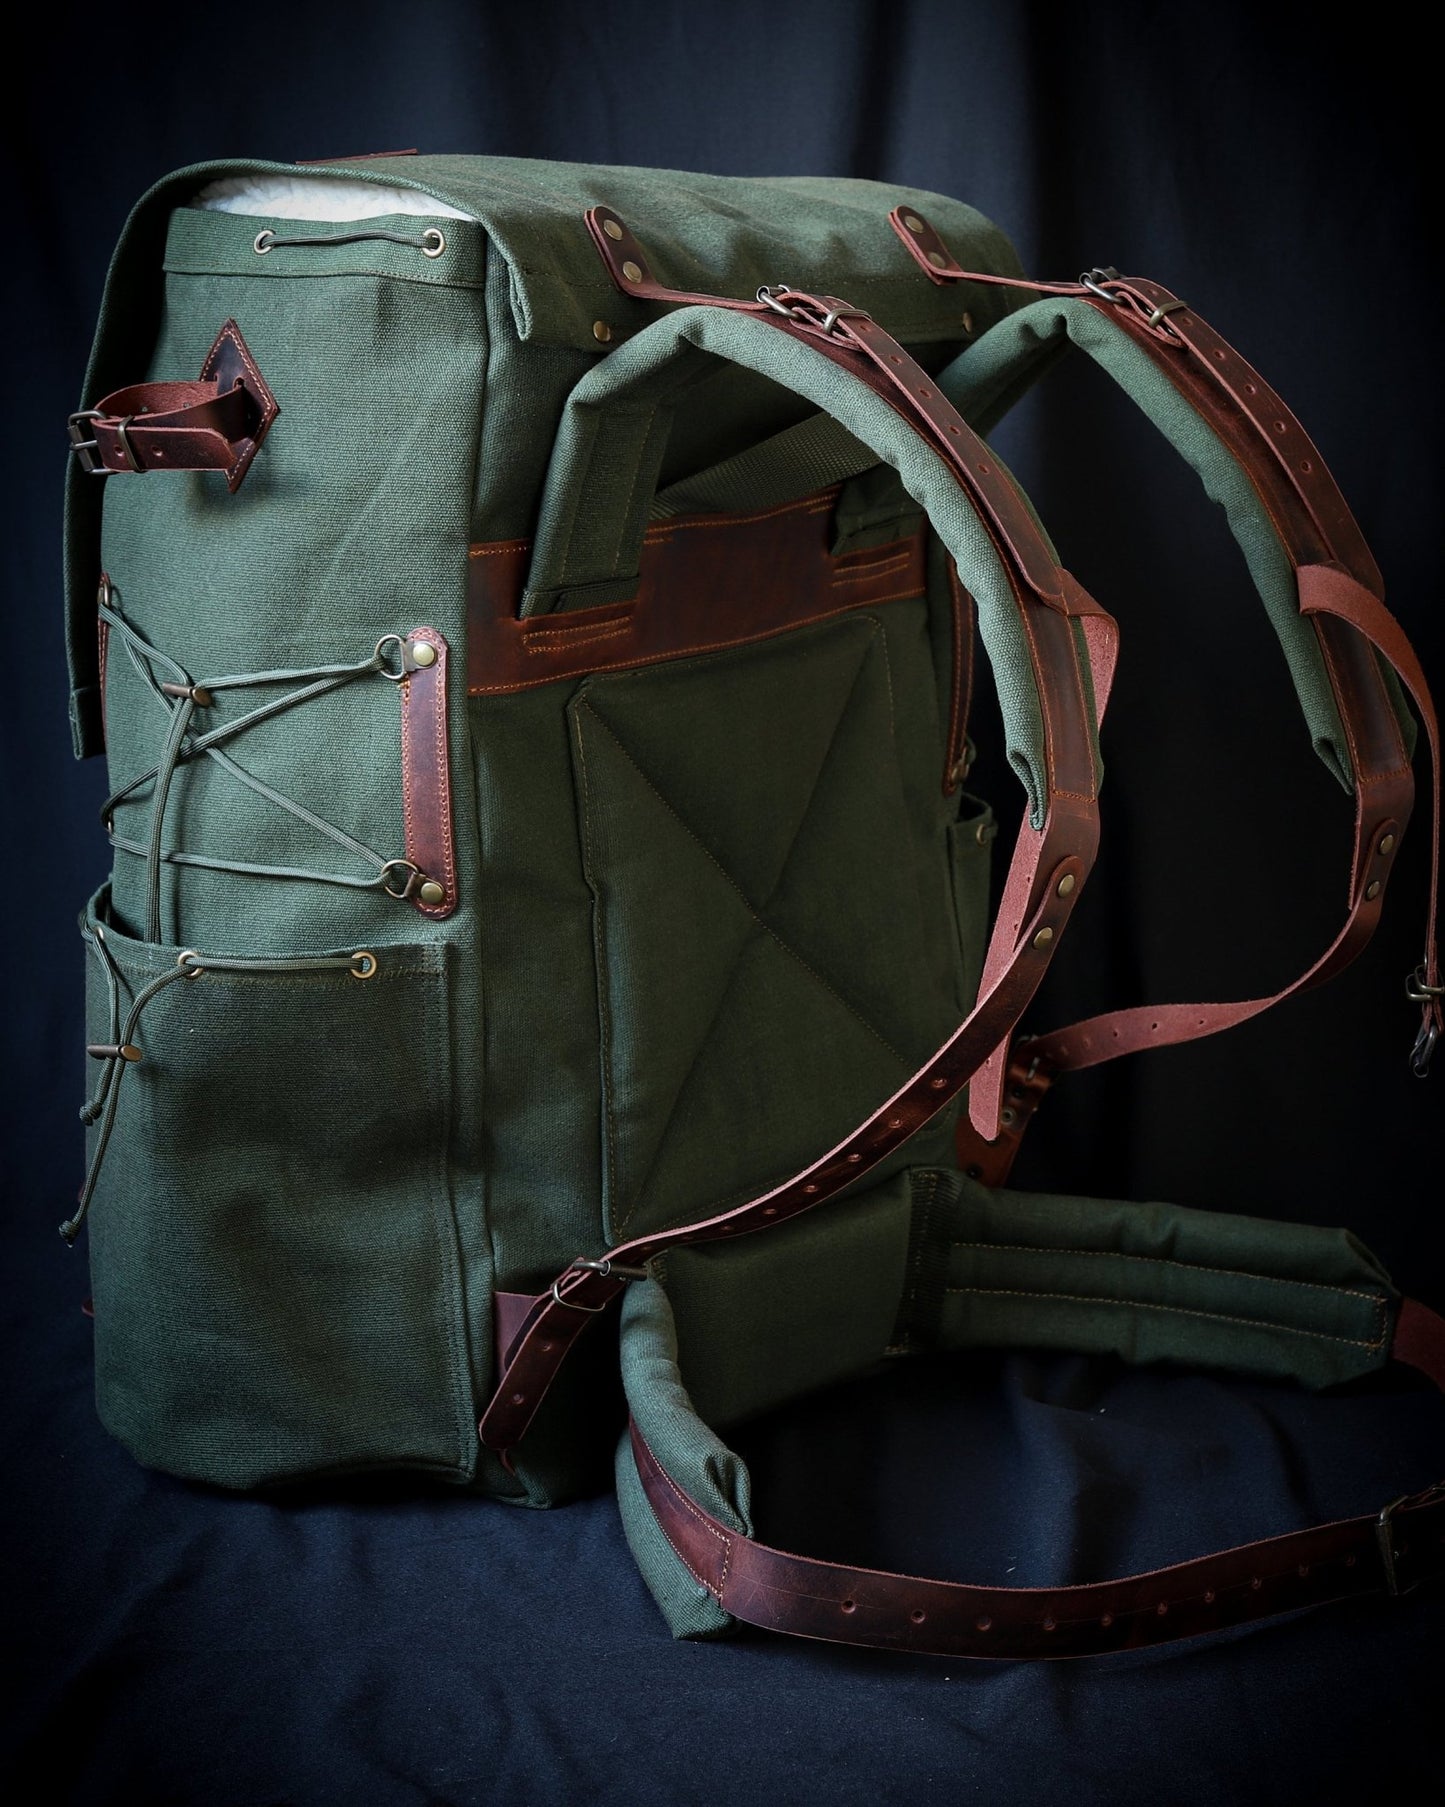 30L to 80L | Green, Brown, Dhaki | Camping Backpack | Buschraft Backpack | Handmade Leather, Canvas Backpack for Travel, Camping, Bushcraft  99percenthandmade Khaki Green 30 Liters 